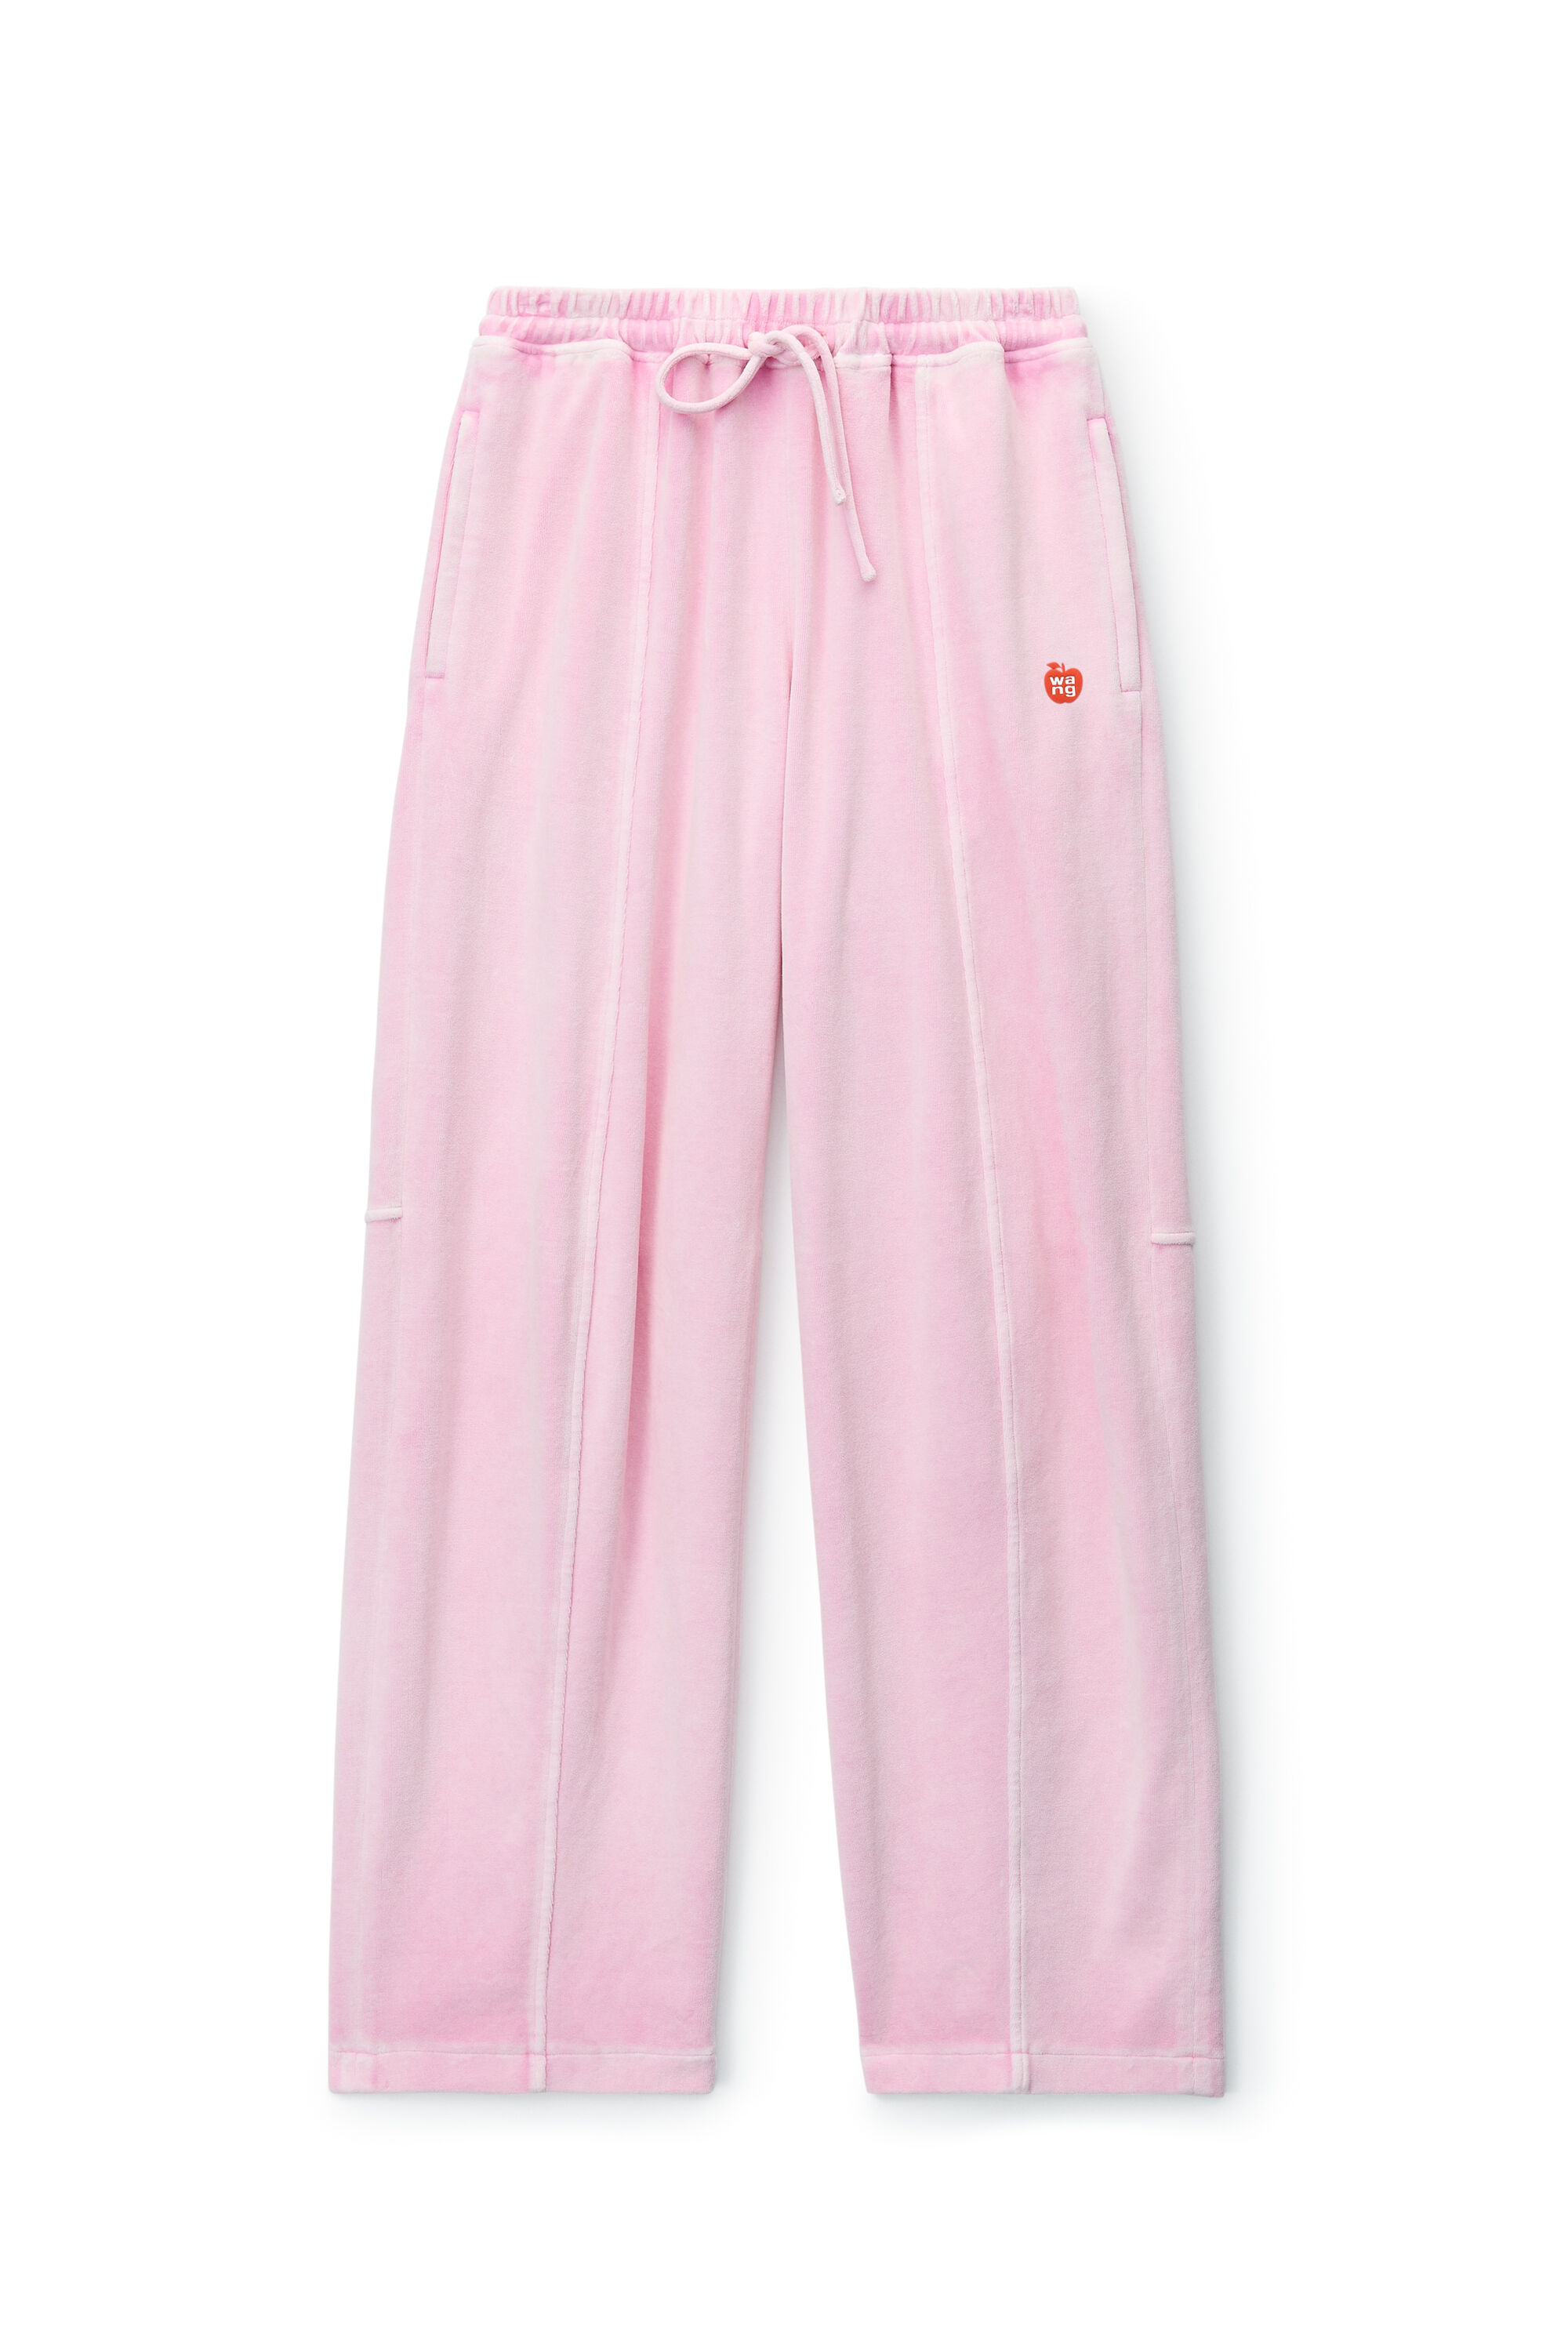 alexanderwang apple logo track pant in velour WASHED CANDY PINK